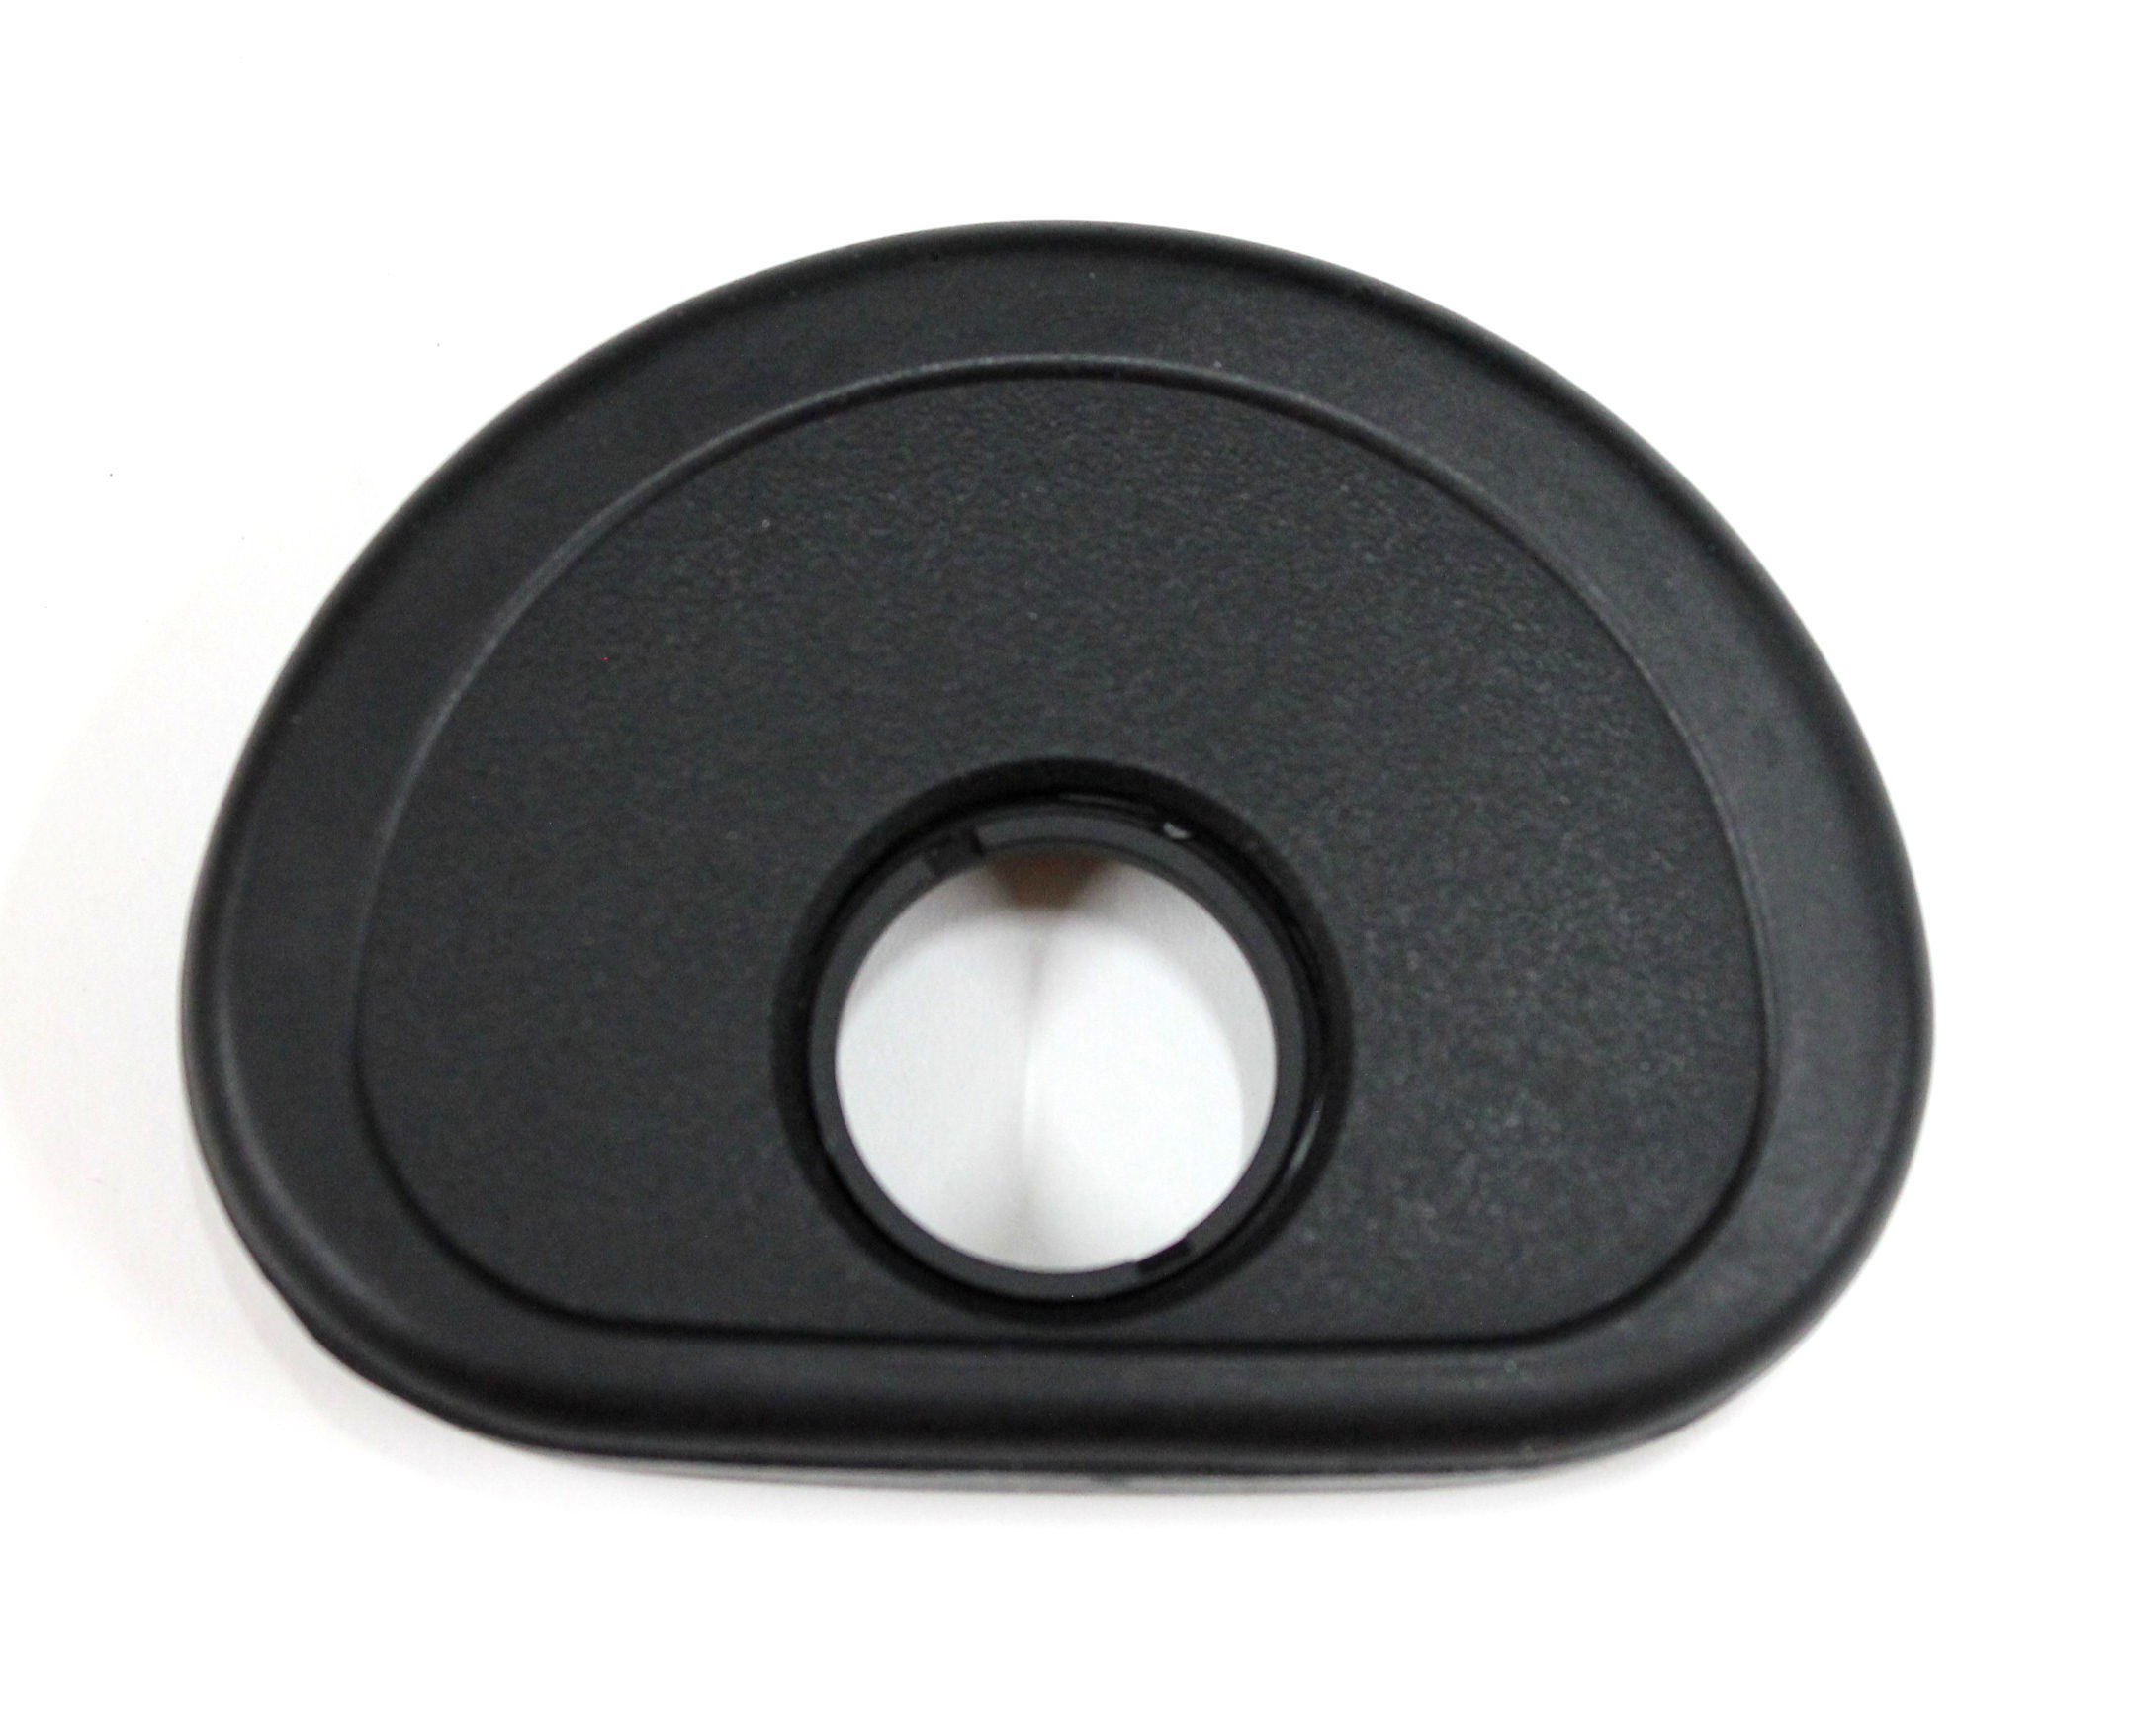 Japan Used Camera Shop | [Mint] Pentax 645 Large Eyecup Eye Cup for 645 645N 645NII 645D 645Z from Japan